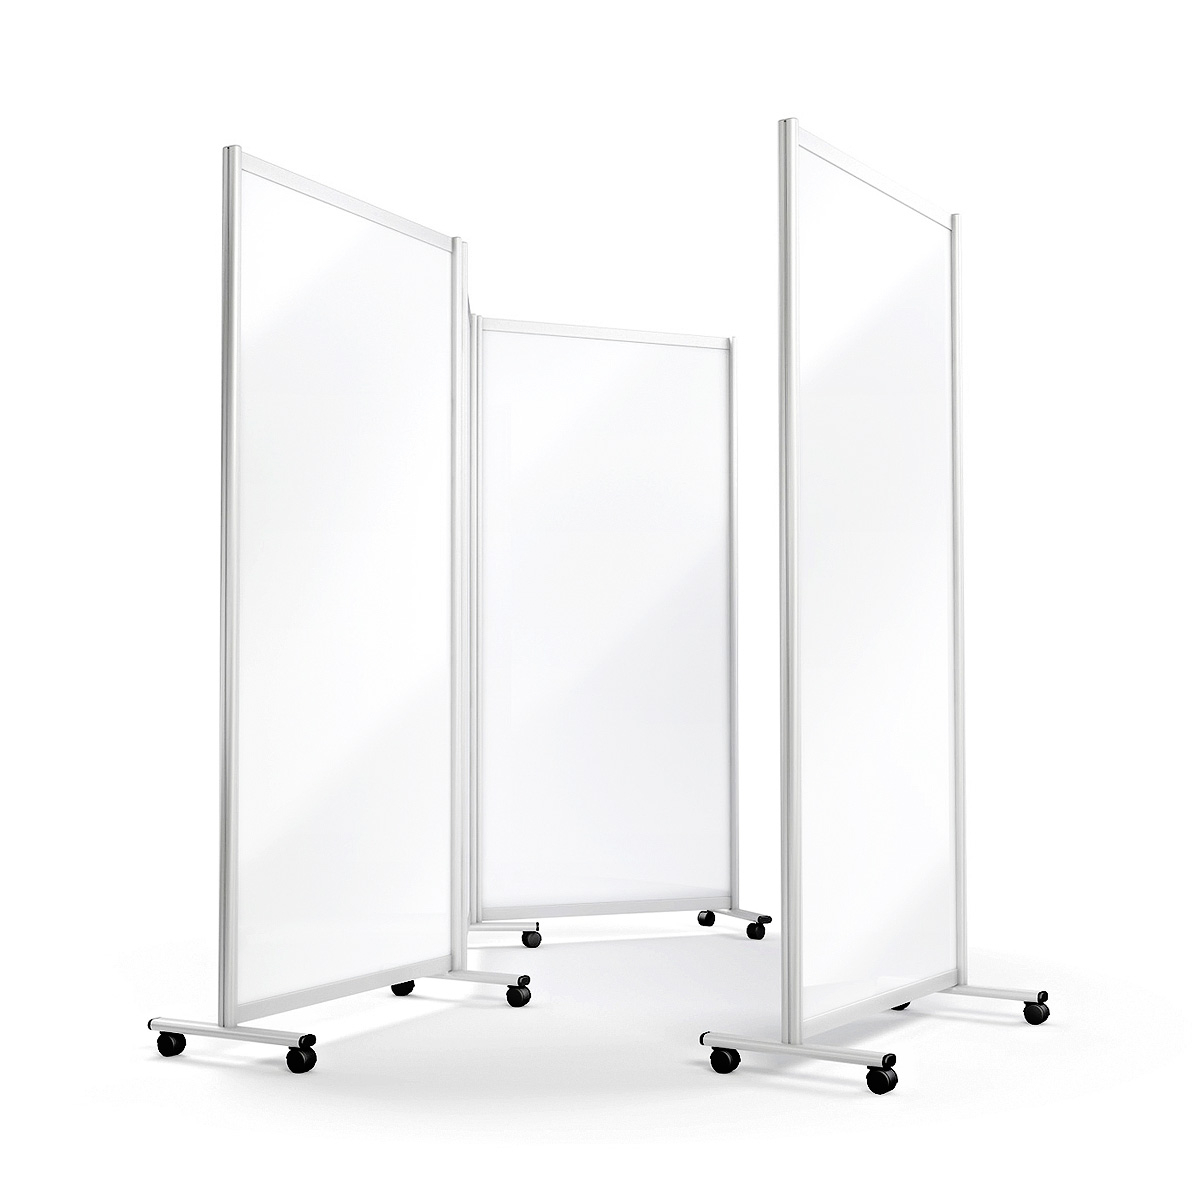 Privacy Room Divider With White Opaque Panel Screens on Wheels